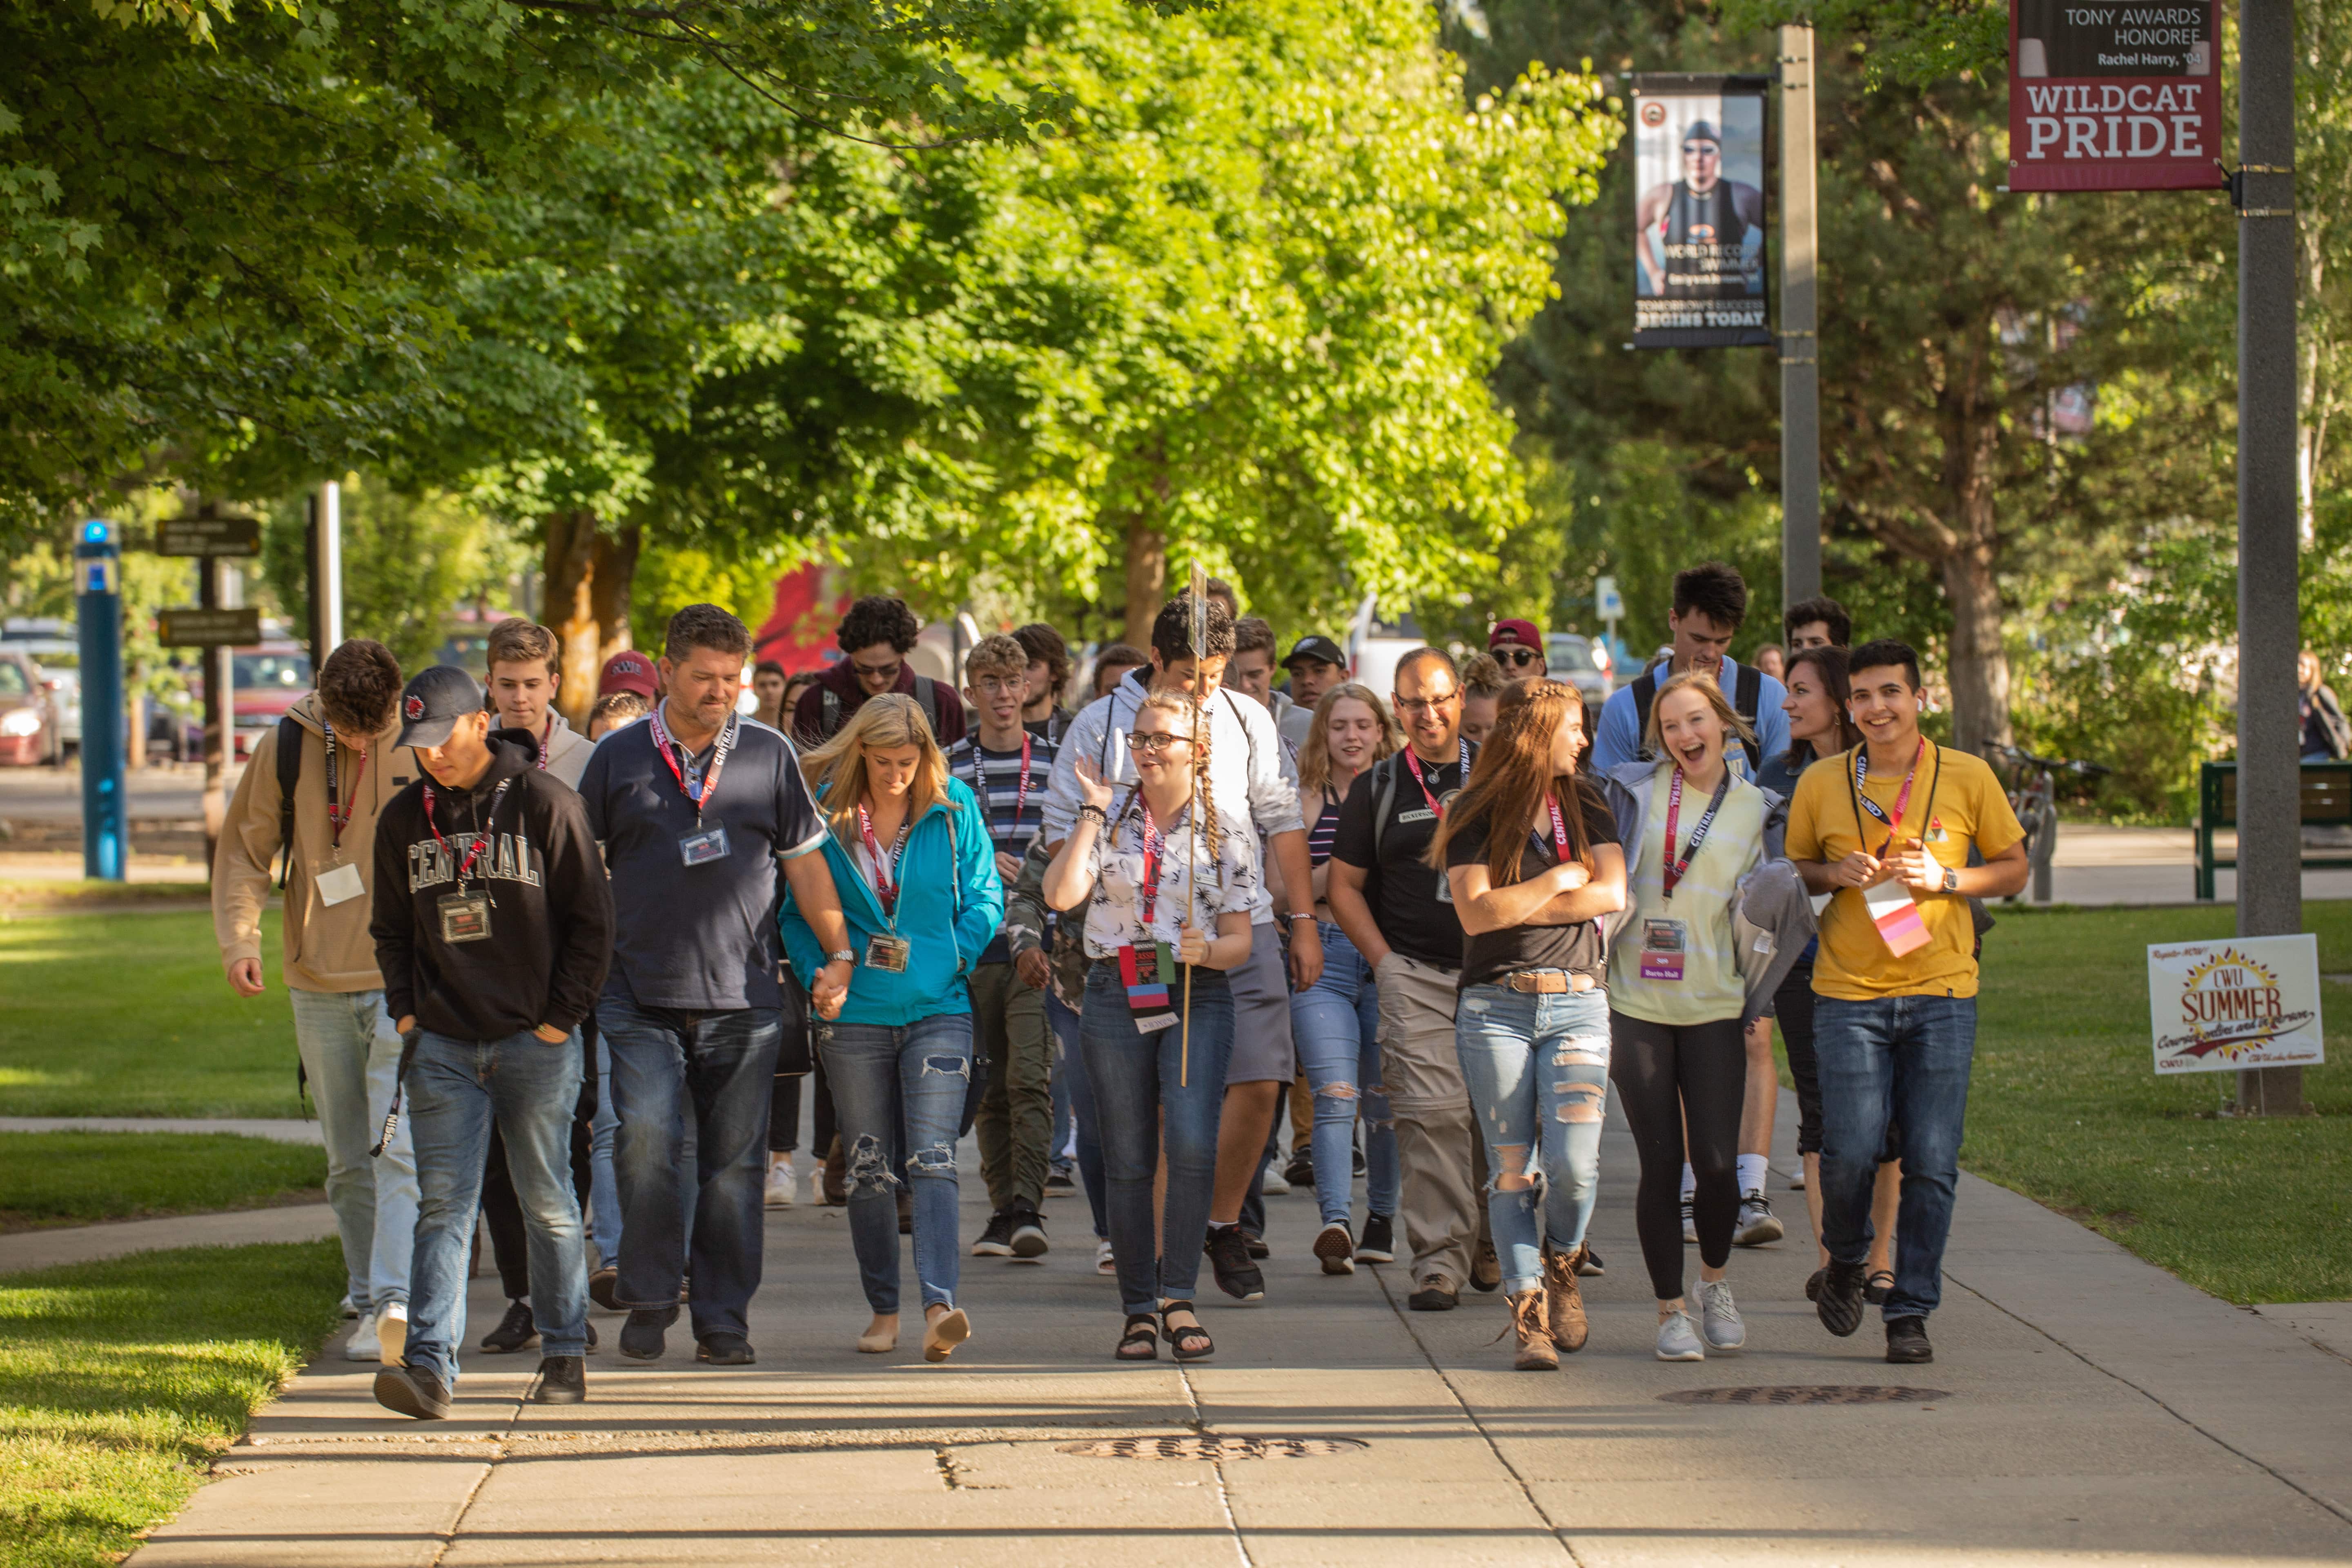 Students visiting campus during the summer time, led by a student ambassador